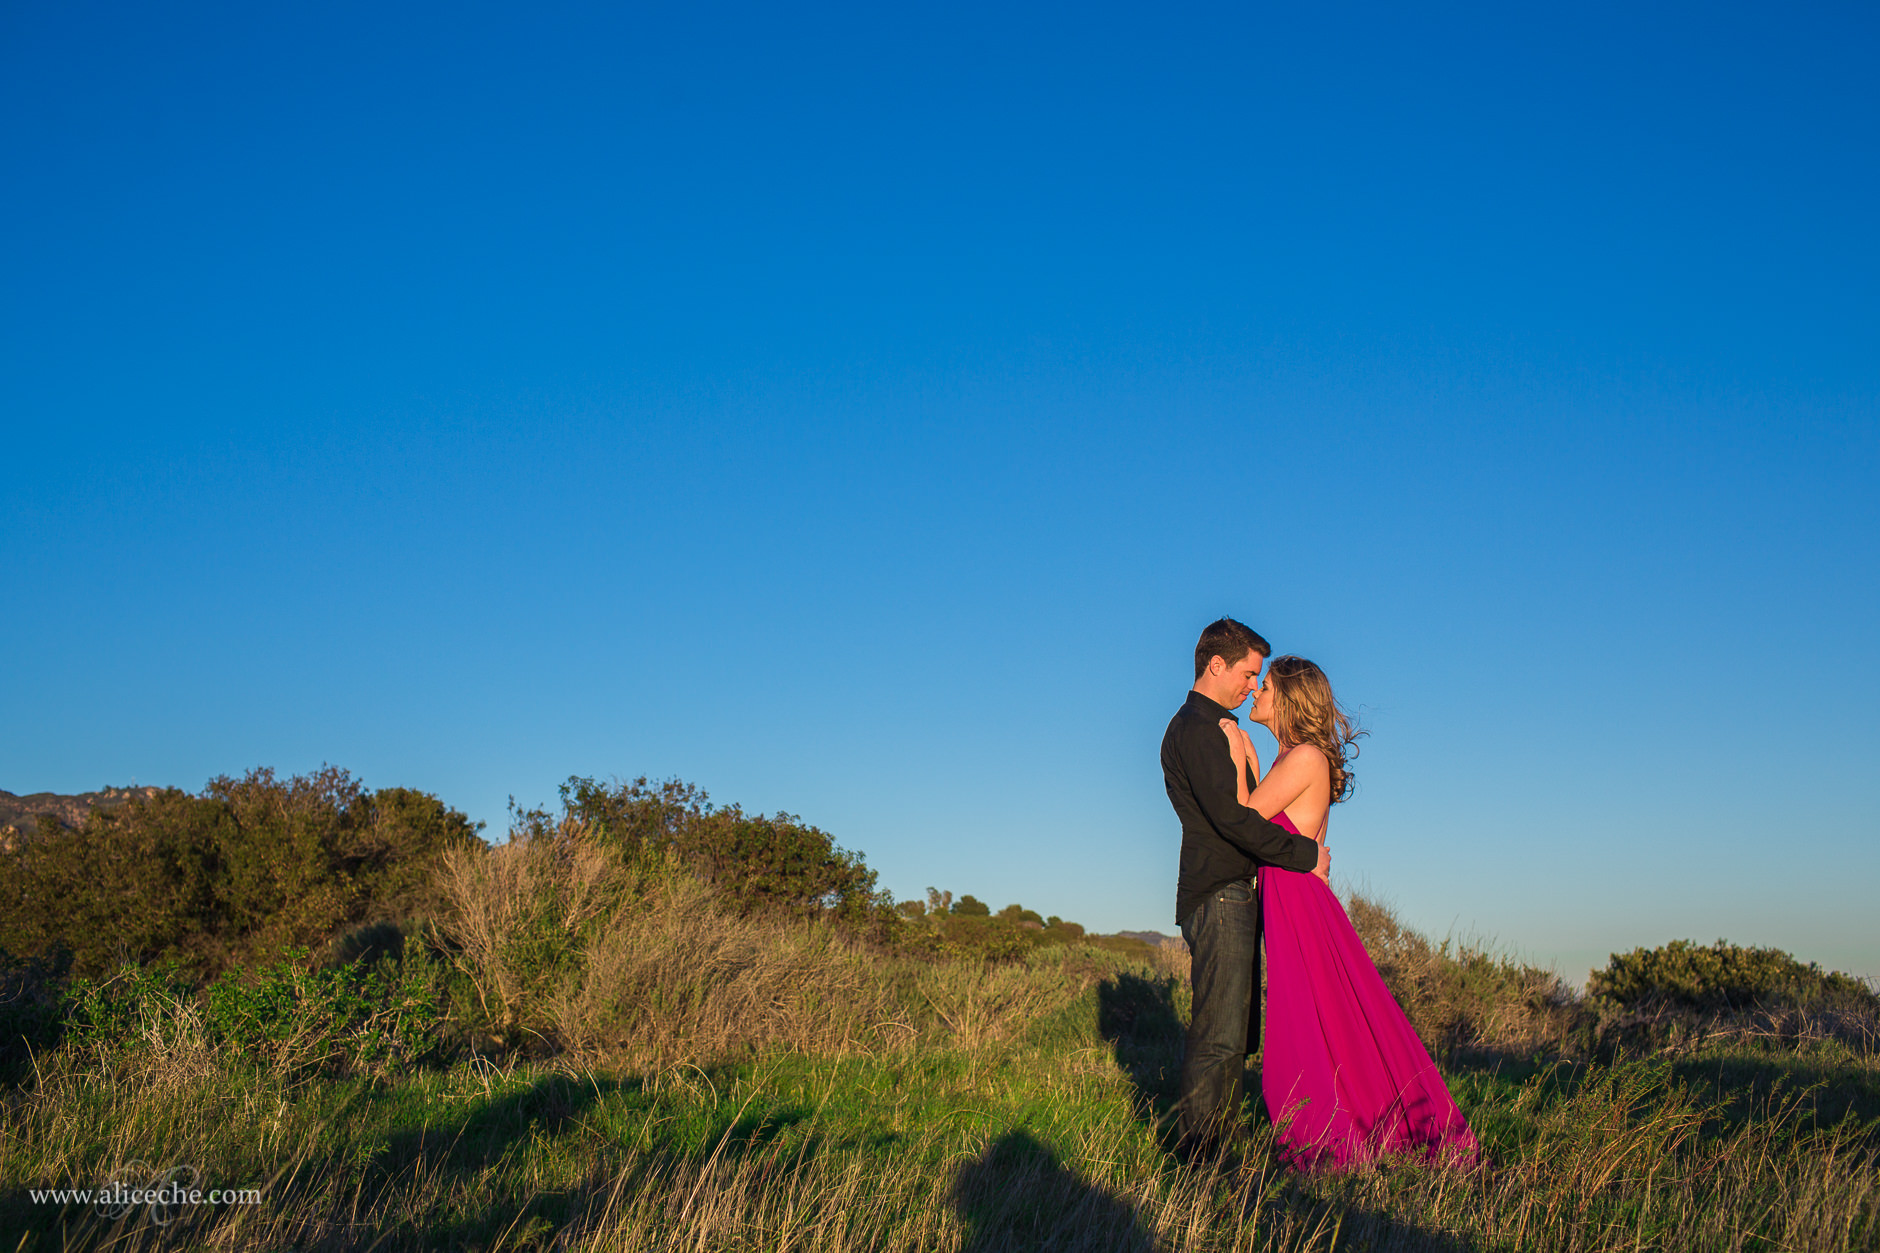 alice-che-photography-destination-wedding-photographer-blue-skies-direct-light-couple-in-love